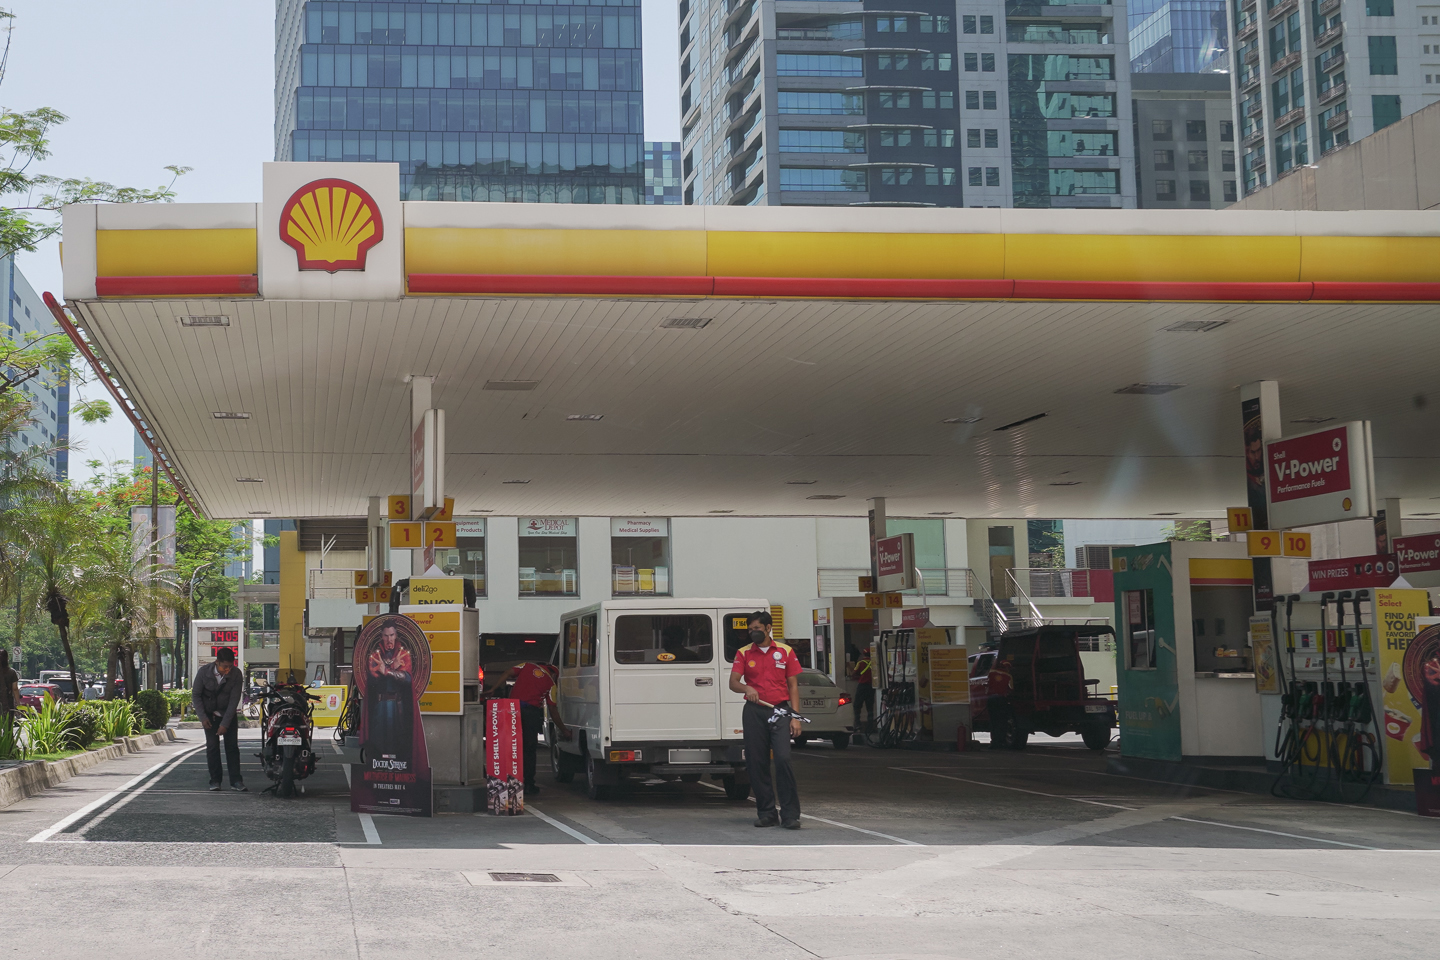 Mega fuel price hike set for next week, Diesel to go up by PHP 5.40-5.70 and Gasoline PHP 1.30-1.60